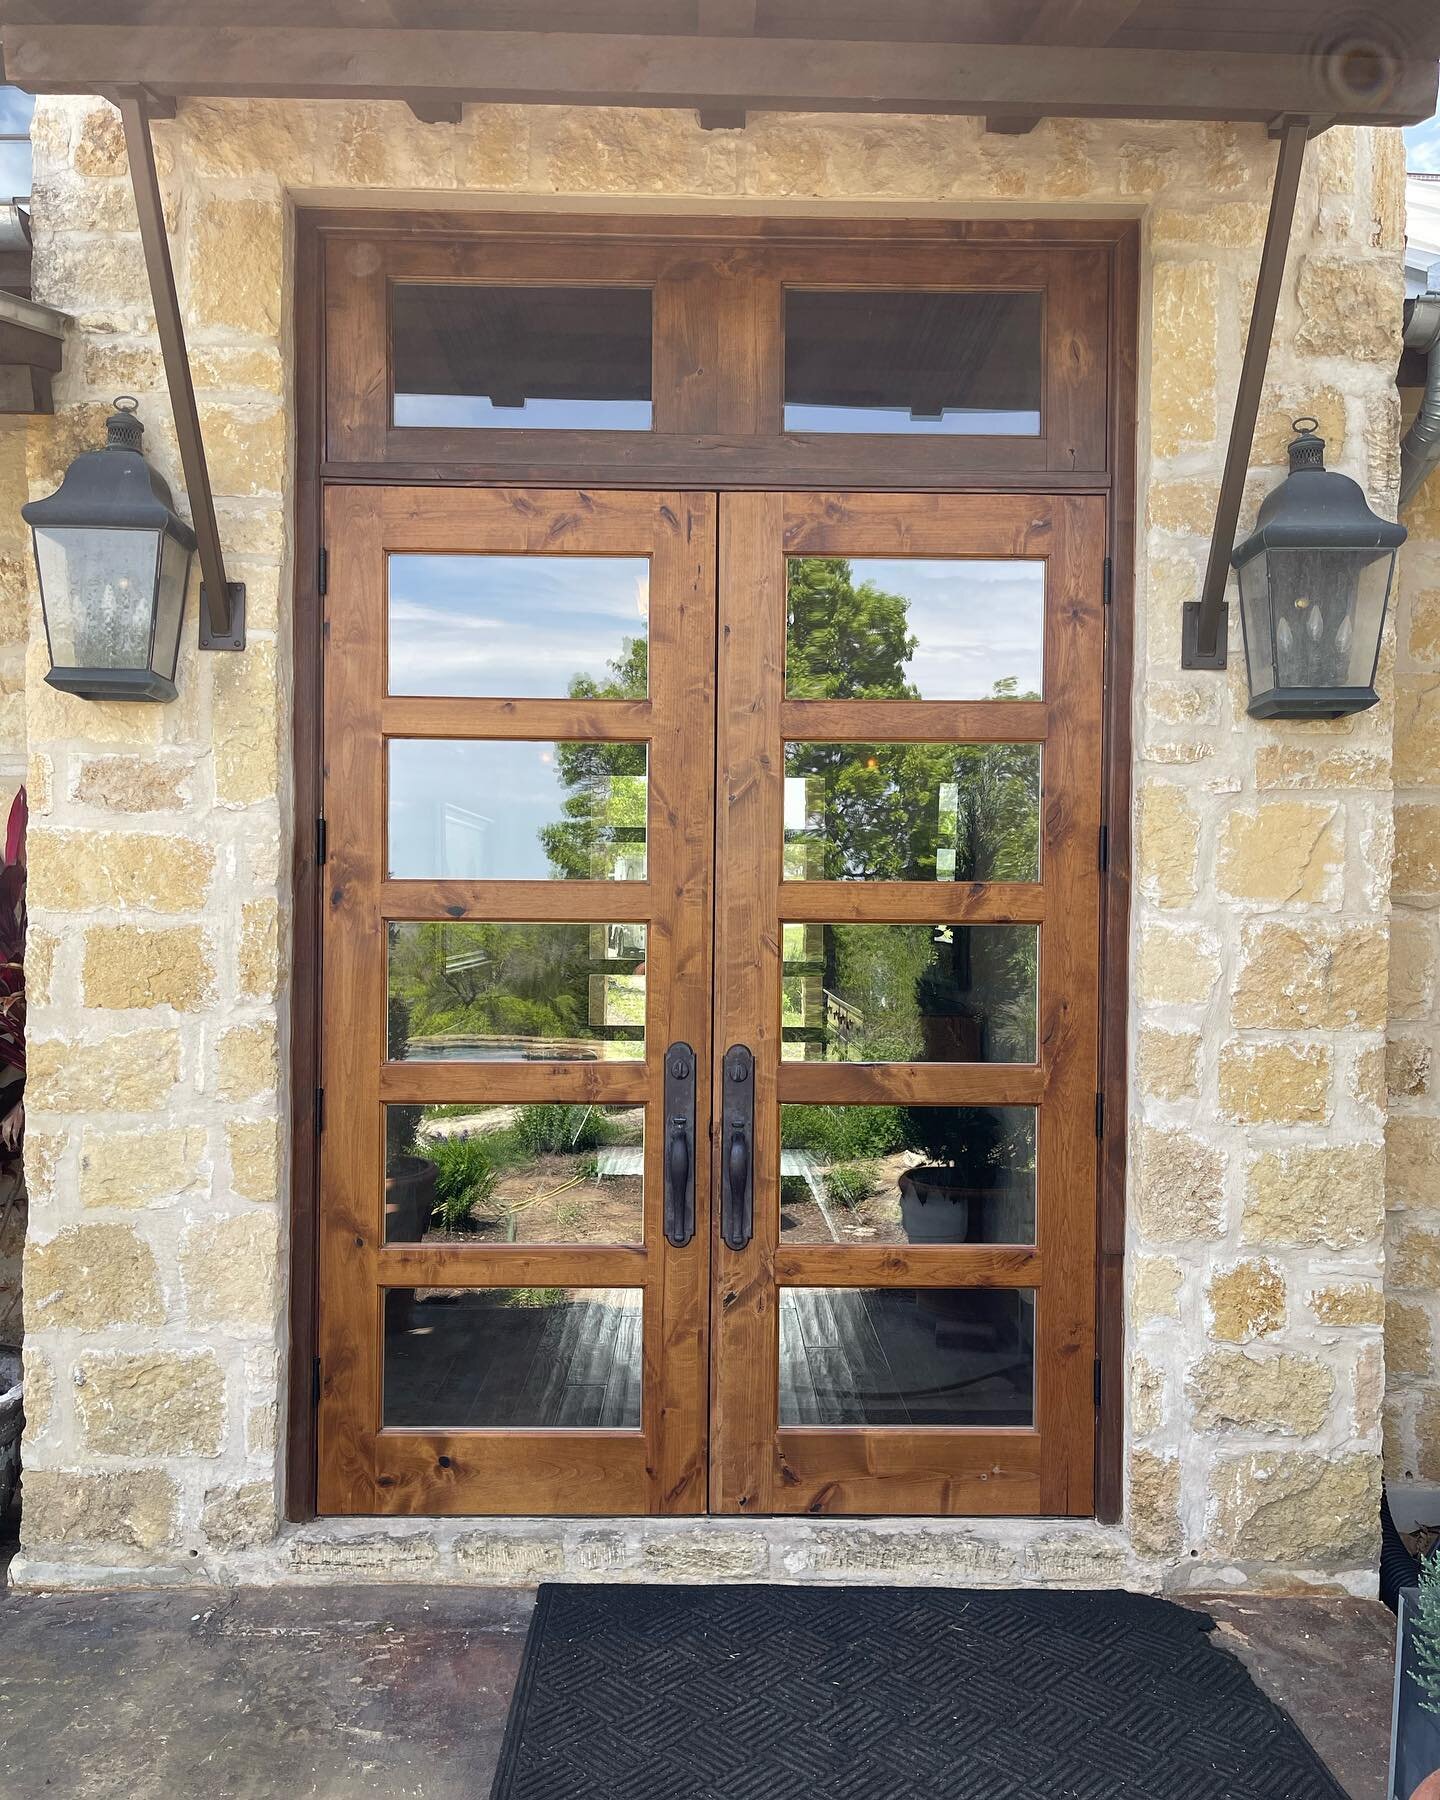 Marine grade varnish is a type of clear finish that is designed to protect wood from the elements. It is often used on exterior doors, but it can also be used on interior doors that are exposed to moisture or sunlight. Shout out to #totalboat for a s